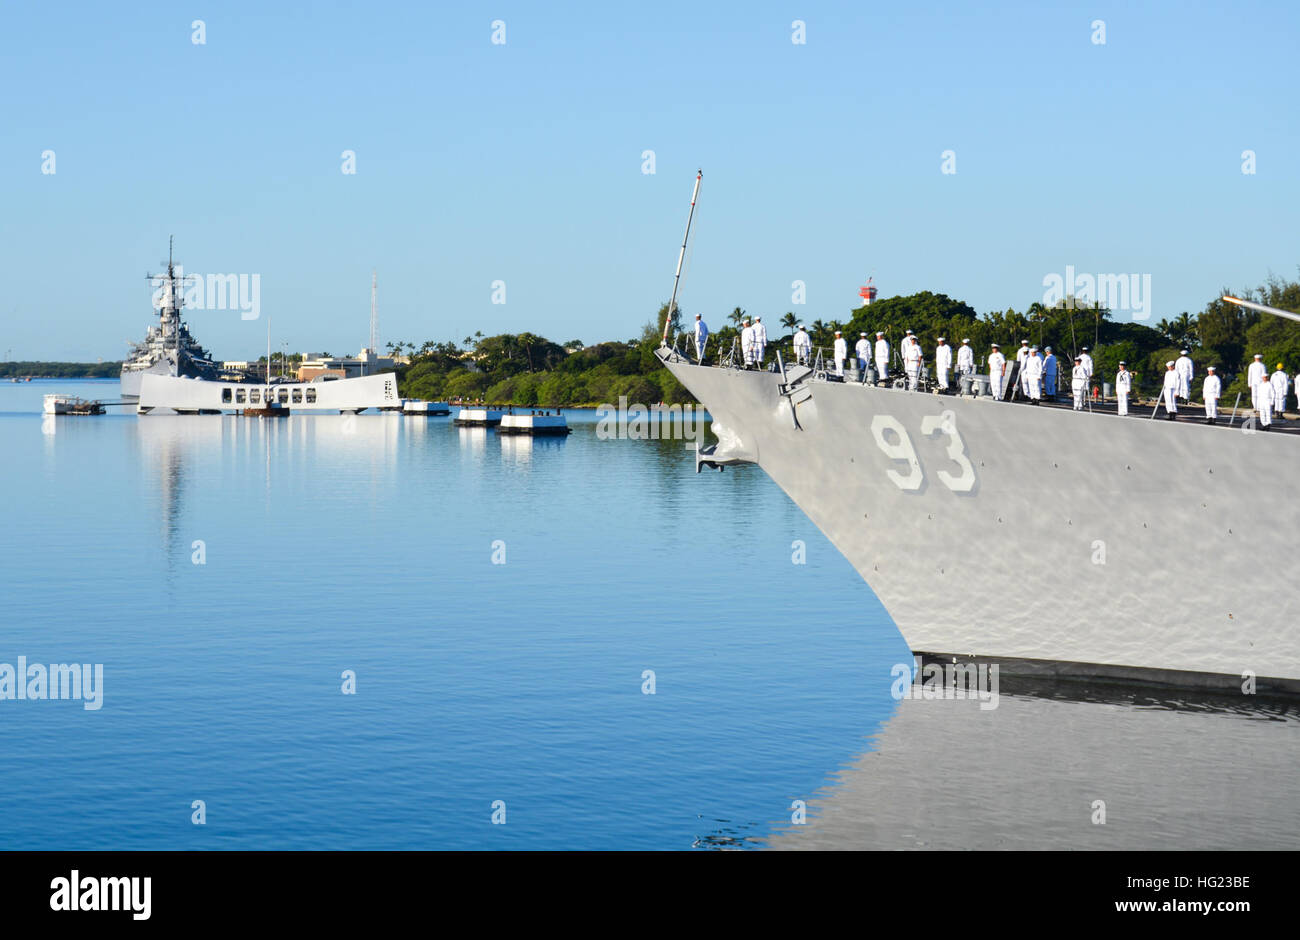 The guided-missile destroyer USS Chung-Hoon (DDG 93) conducts a pass-in-review by the USS Arizona Memorial during the 73rd Anniversary Pearl Harbor Day commemoration ceremony at the Pearl Harbor Visitor Center. More than 2,000 guests, including Pearl Harbor survivors and other veterans, attended the National Park Service and U.S. Navy-hosted joint memorial ceremony at the World War II Valor in the Pacific National Monument. This year's theme focused on 'Preserving the Memory.' (U.S. Navy photo by Mass Communication Specialist 1st Class Katherine Hofman/Released) USS Chung-Hoon operations 14120 Stock Photo